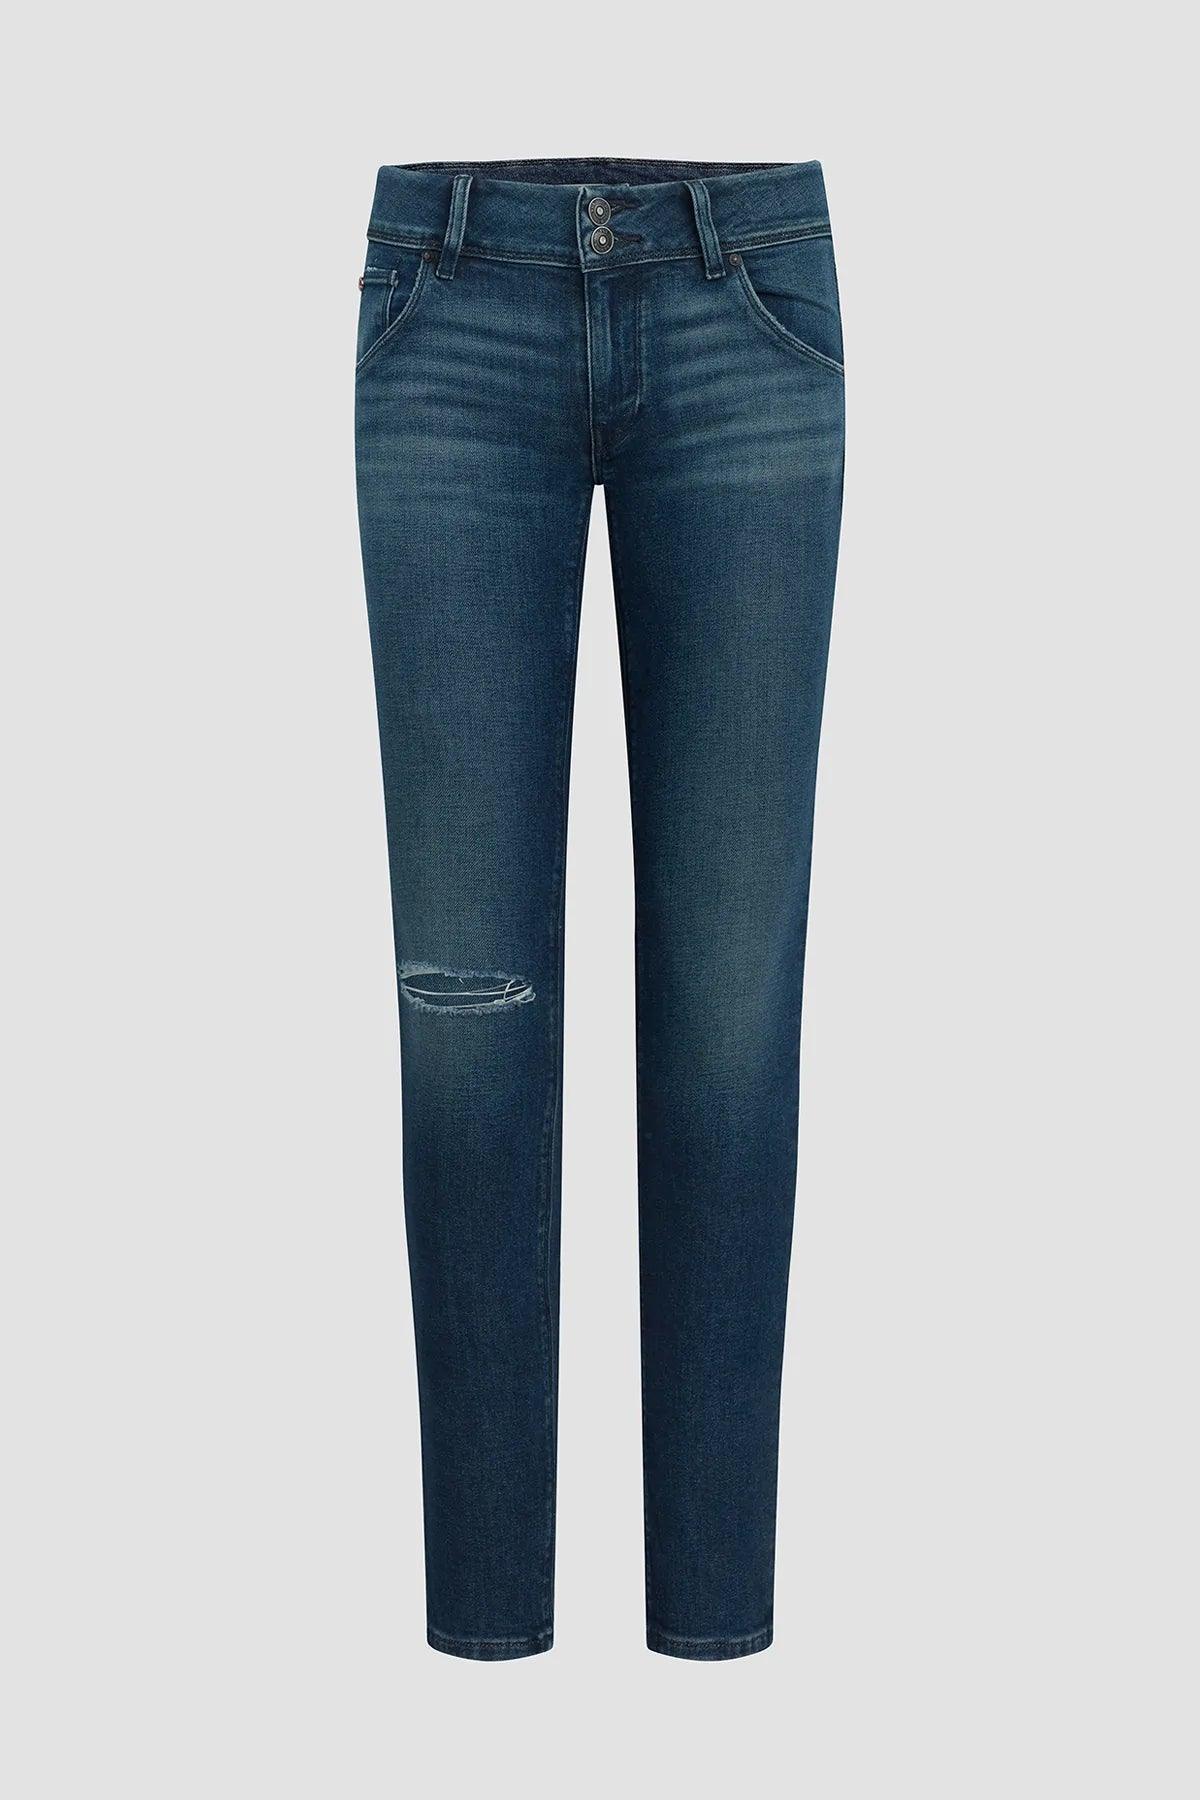 Collin Mid-Rise Skinny Jeans by Hudson - Haven